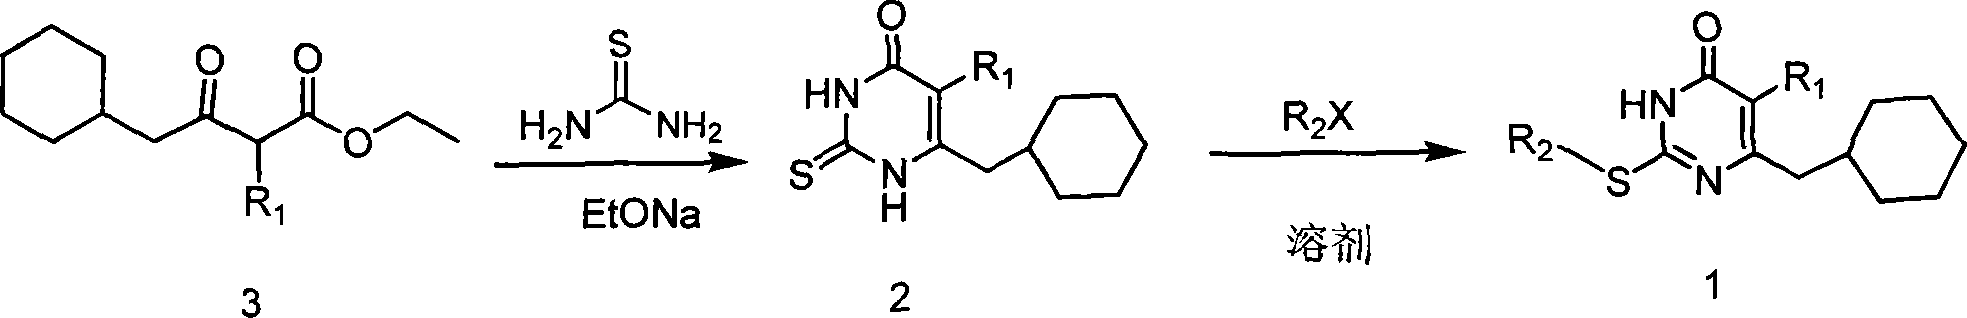 6-cyclohexyl methyl substituted s-DABO compound, method for synthesizing same and uses thereof